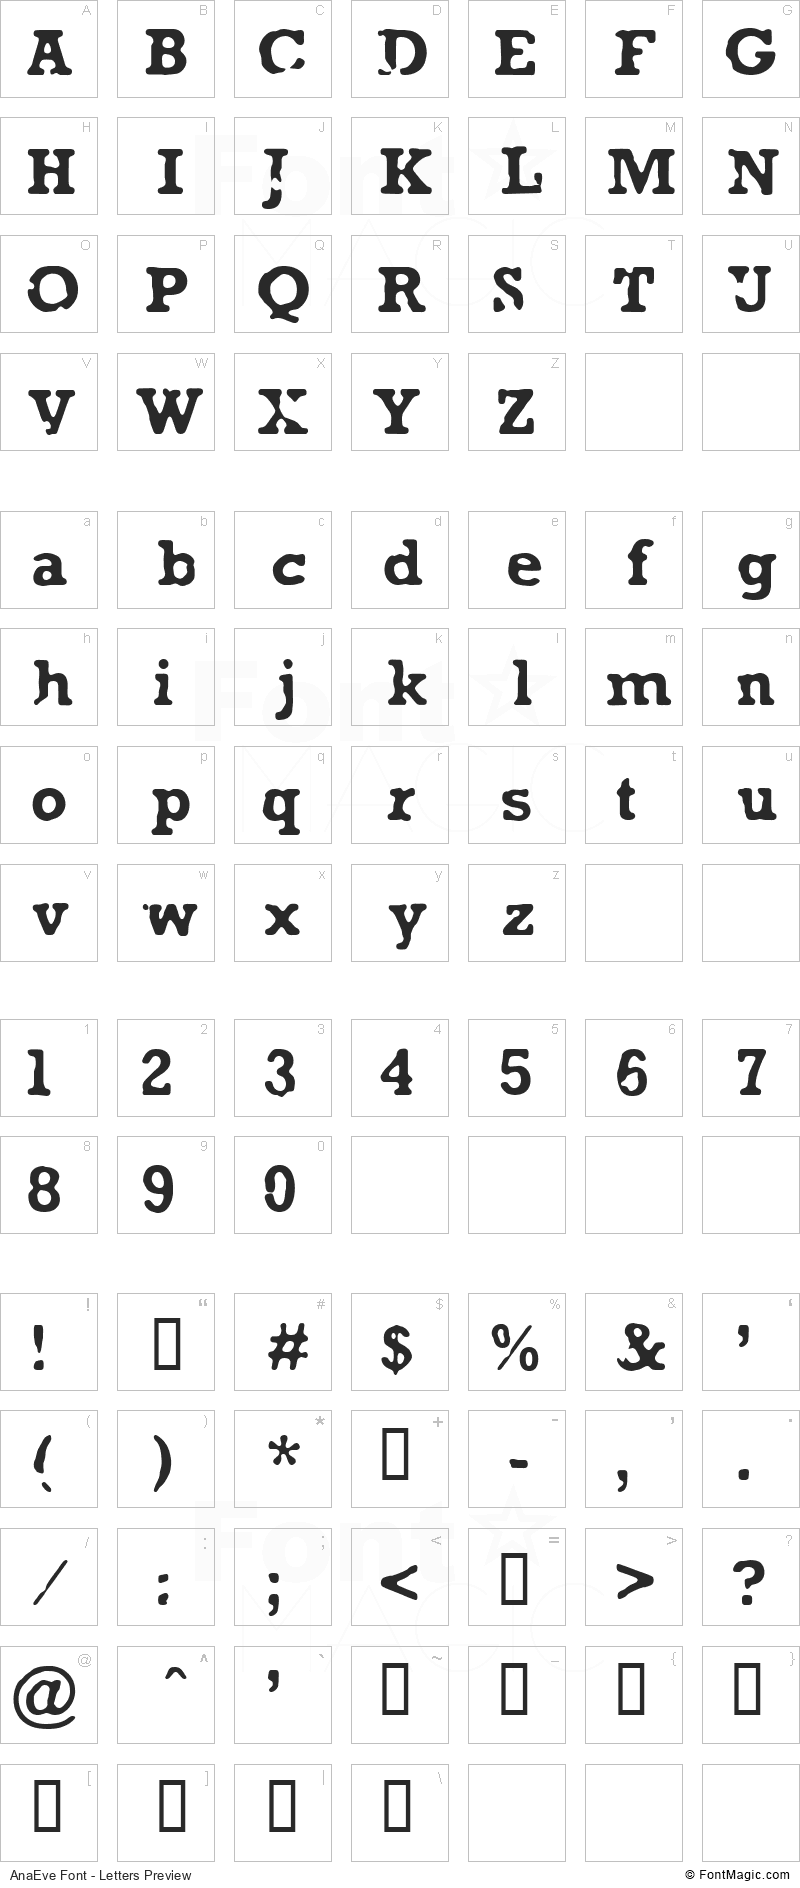 AnaEve Font - All Latters Preview Chart